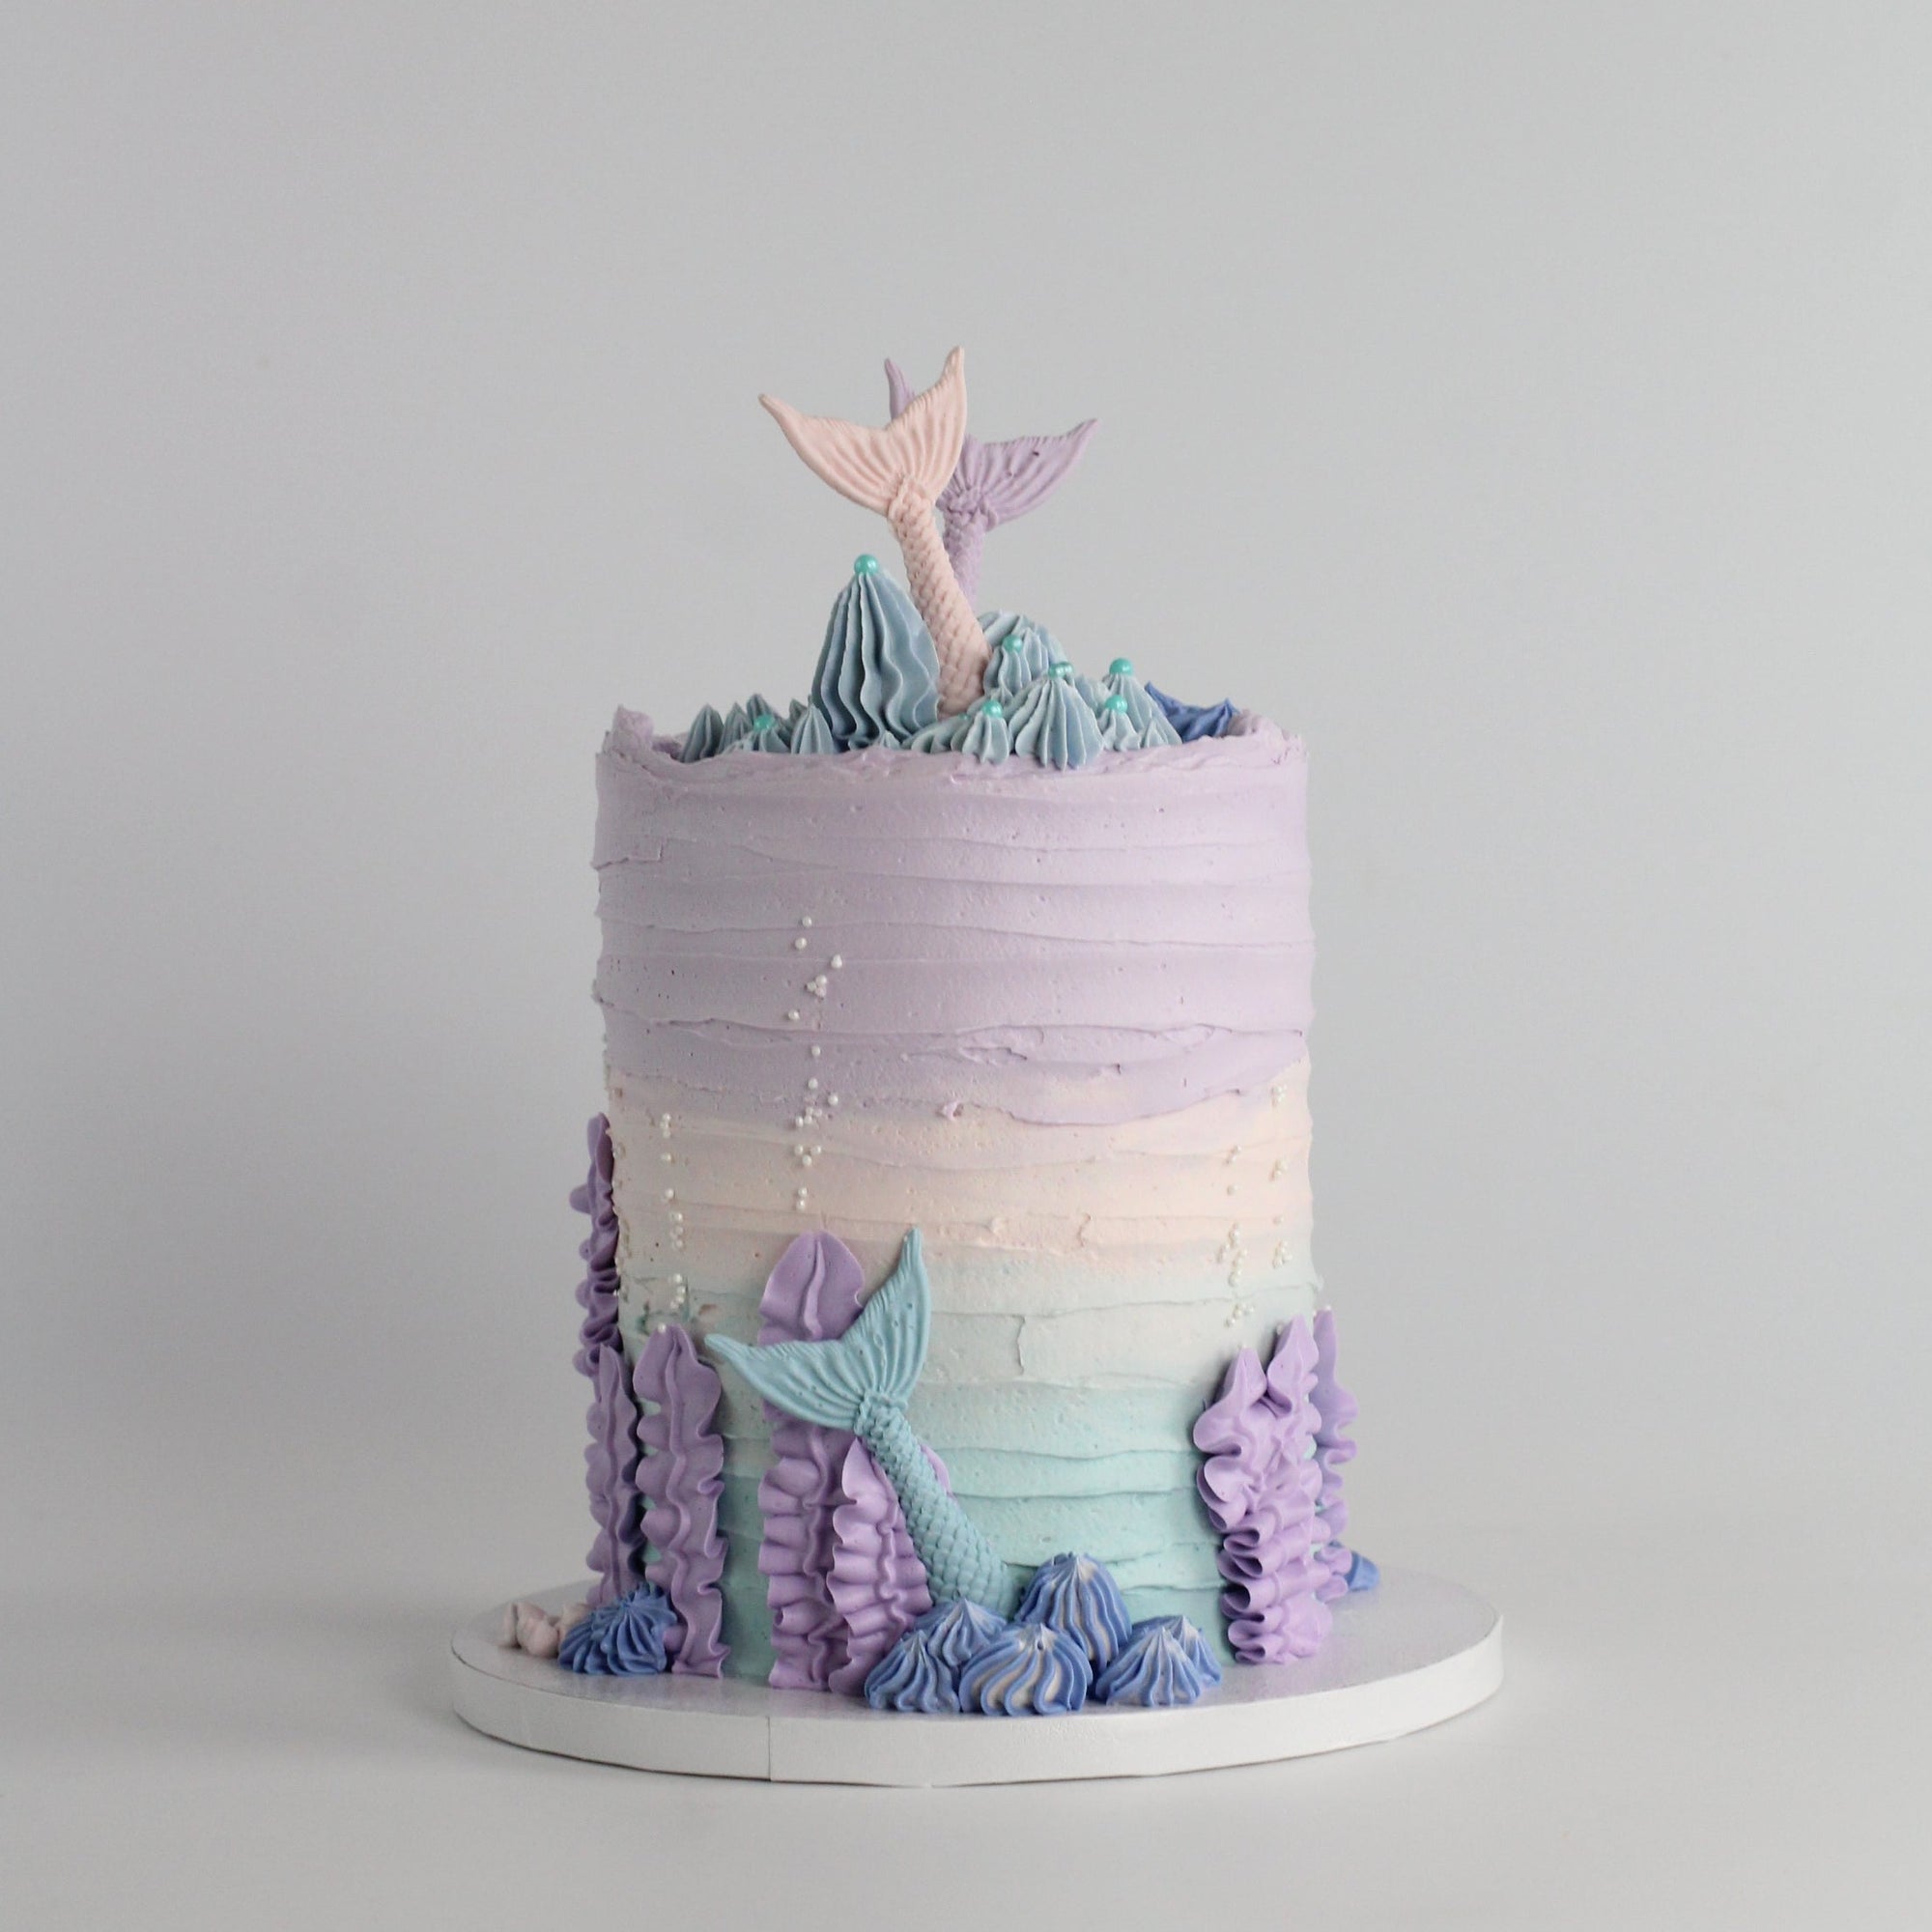 Mermaid underwater cake - decoated with sugar nermaid tails, buttercream reef & and pearls